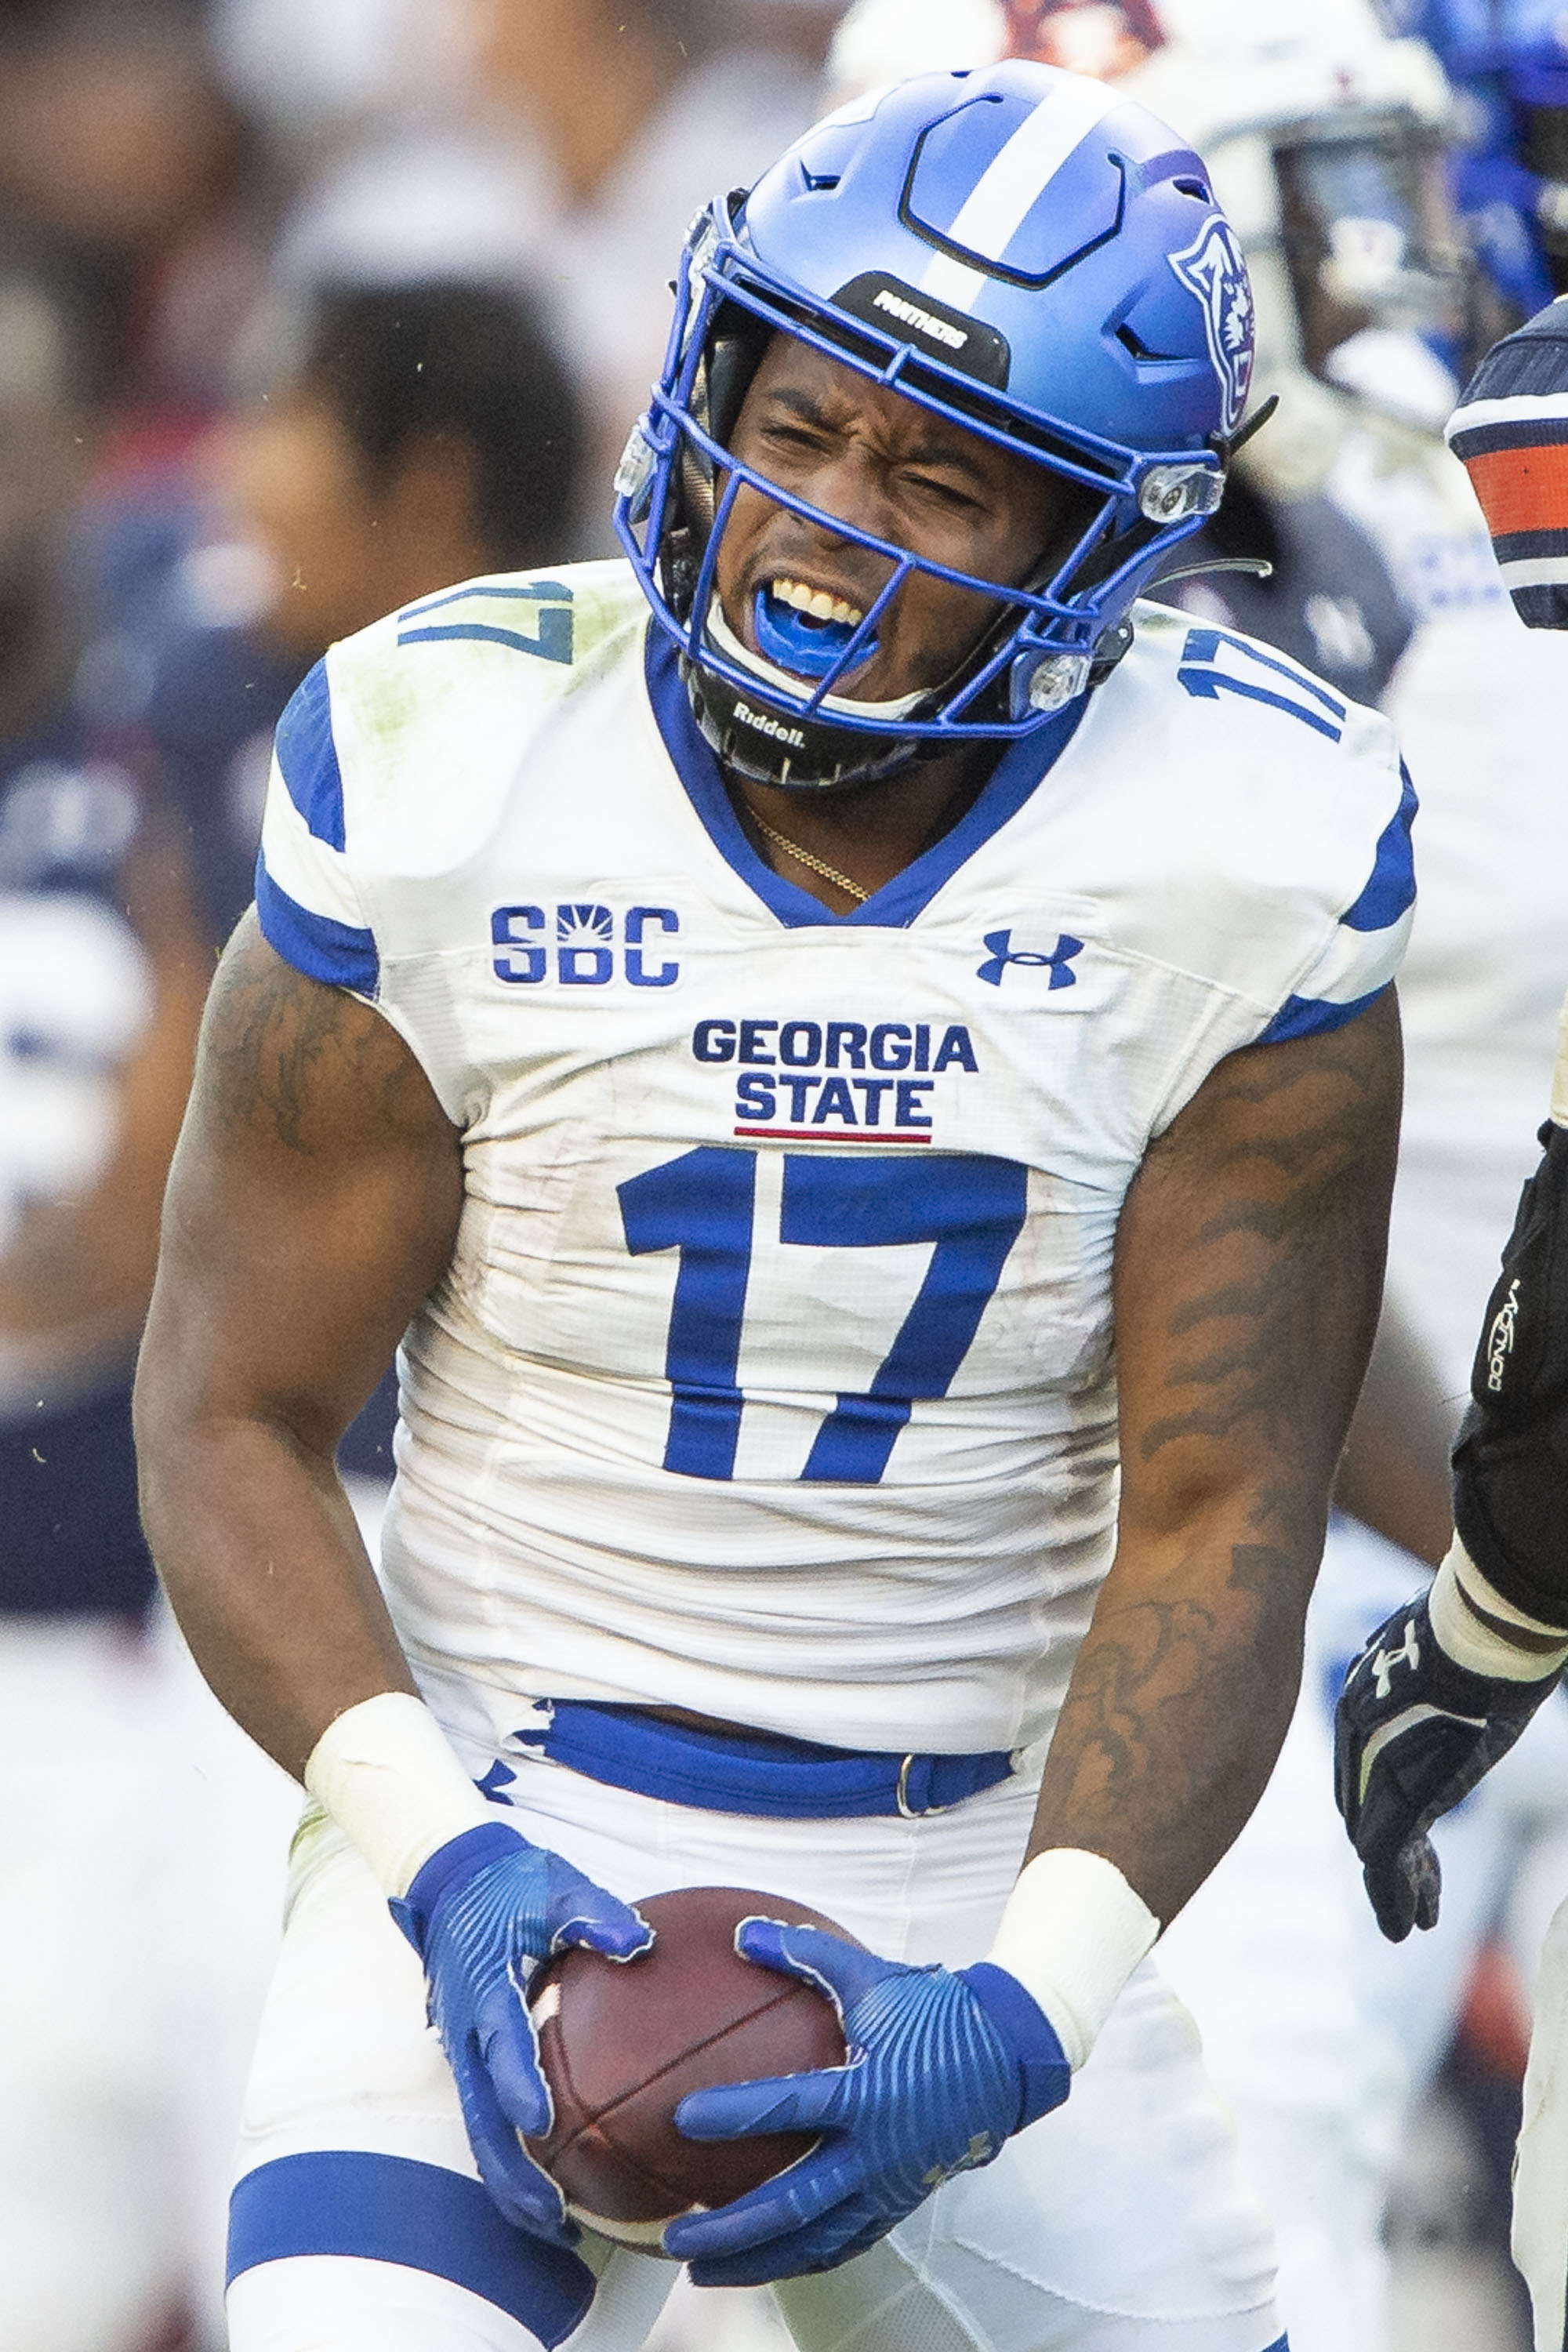 Running back Destin Coates of the Georgia State Panthers celebrates after a big play during their game against the Auburn Tigers at Jordan-Hare Stadium on September 25, 2021 in Auburn, Alabama.